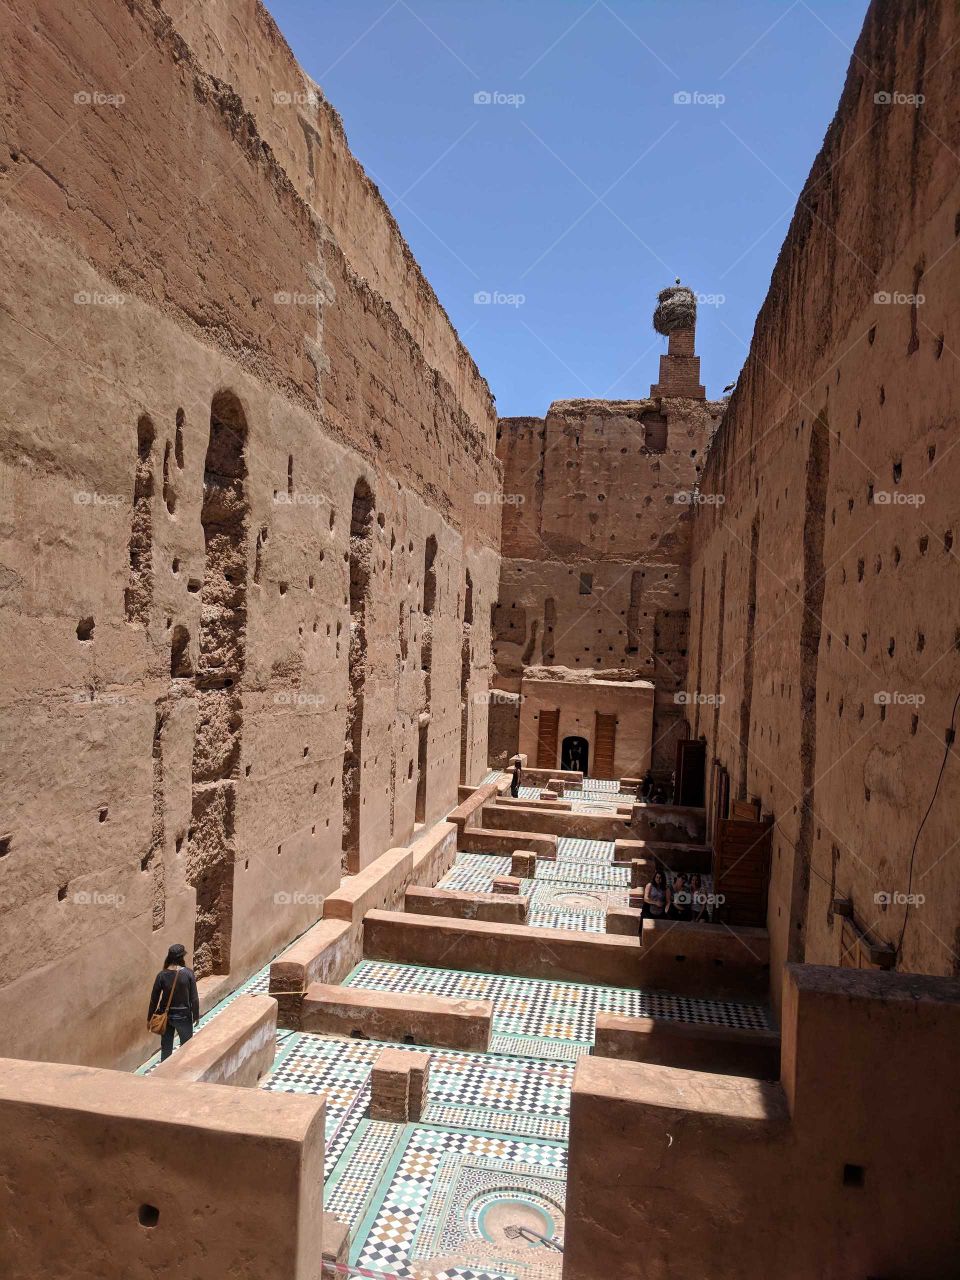 Exploring the Ancient Ruins of the Palais El Badi in Marrakech in Morocco - Colorful Ceramic Tile Mosaic Floors and Brown Stone and Clay Walls